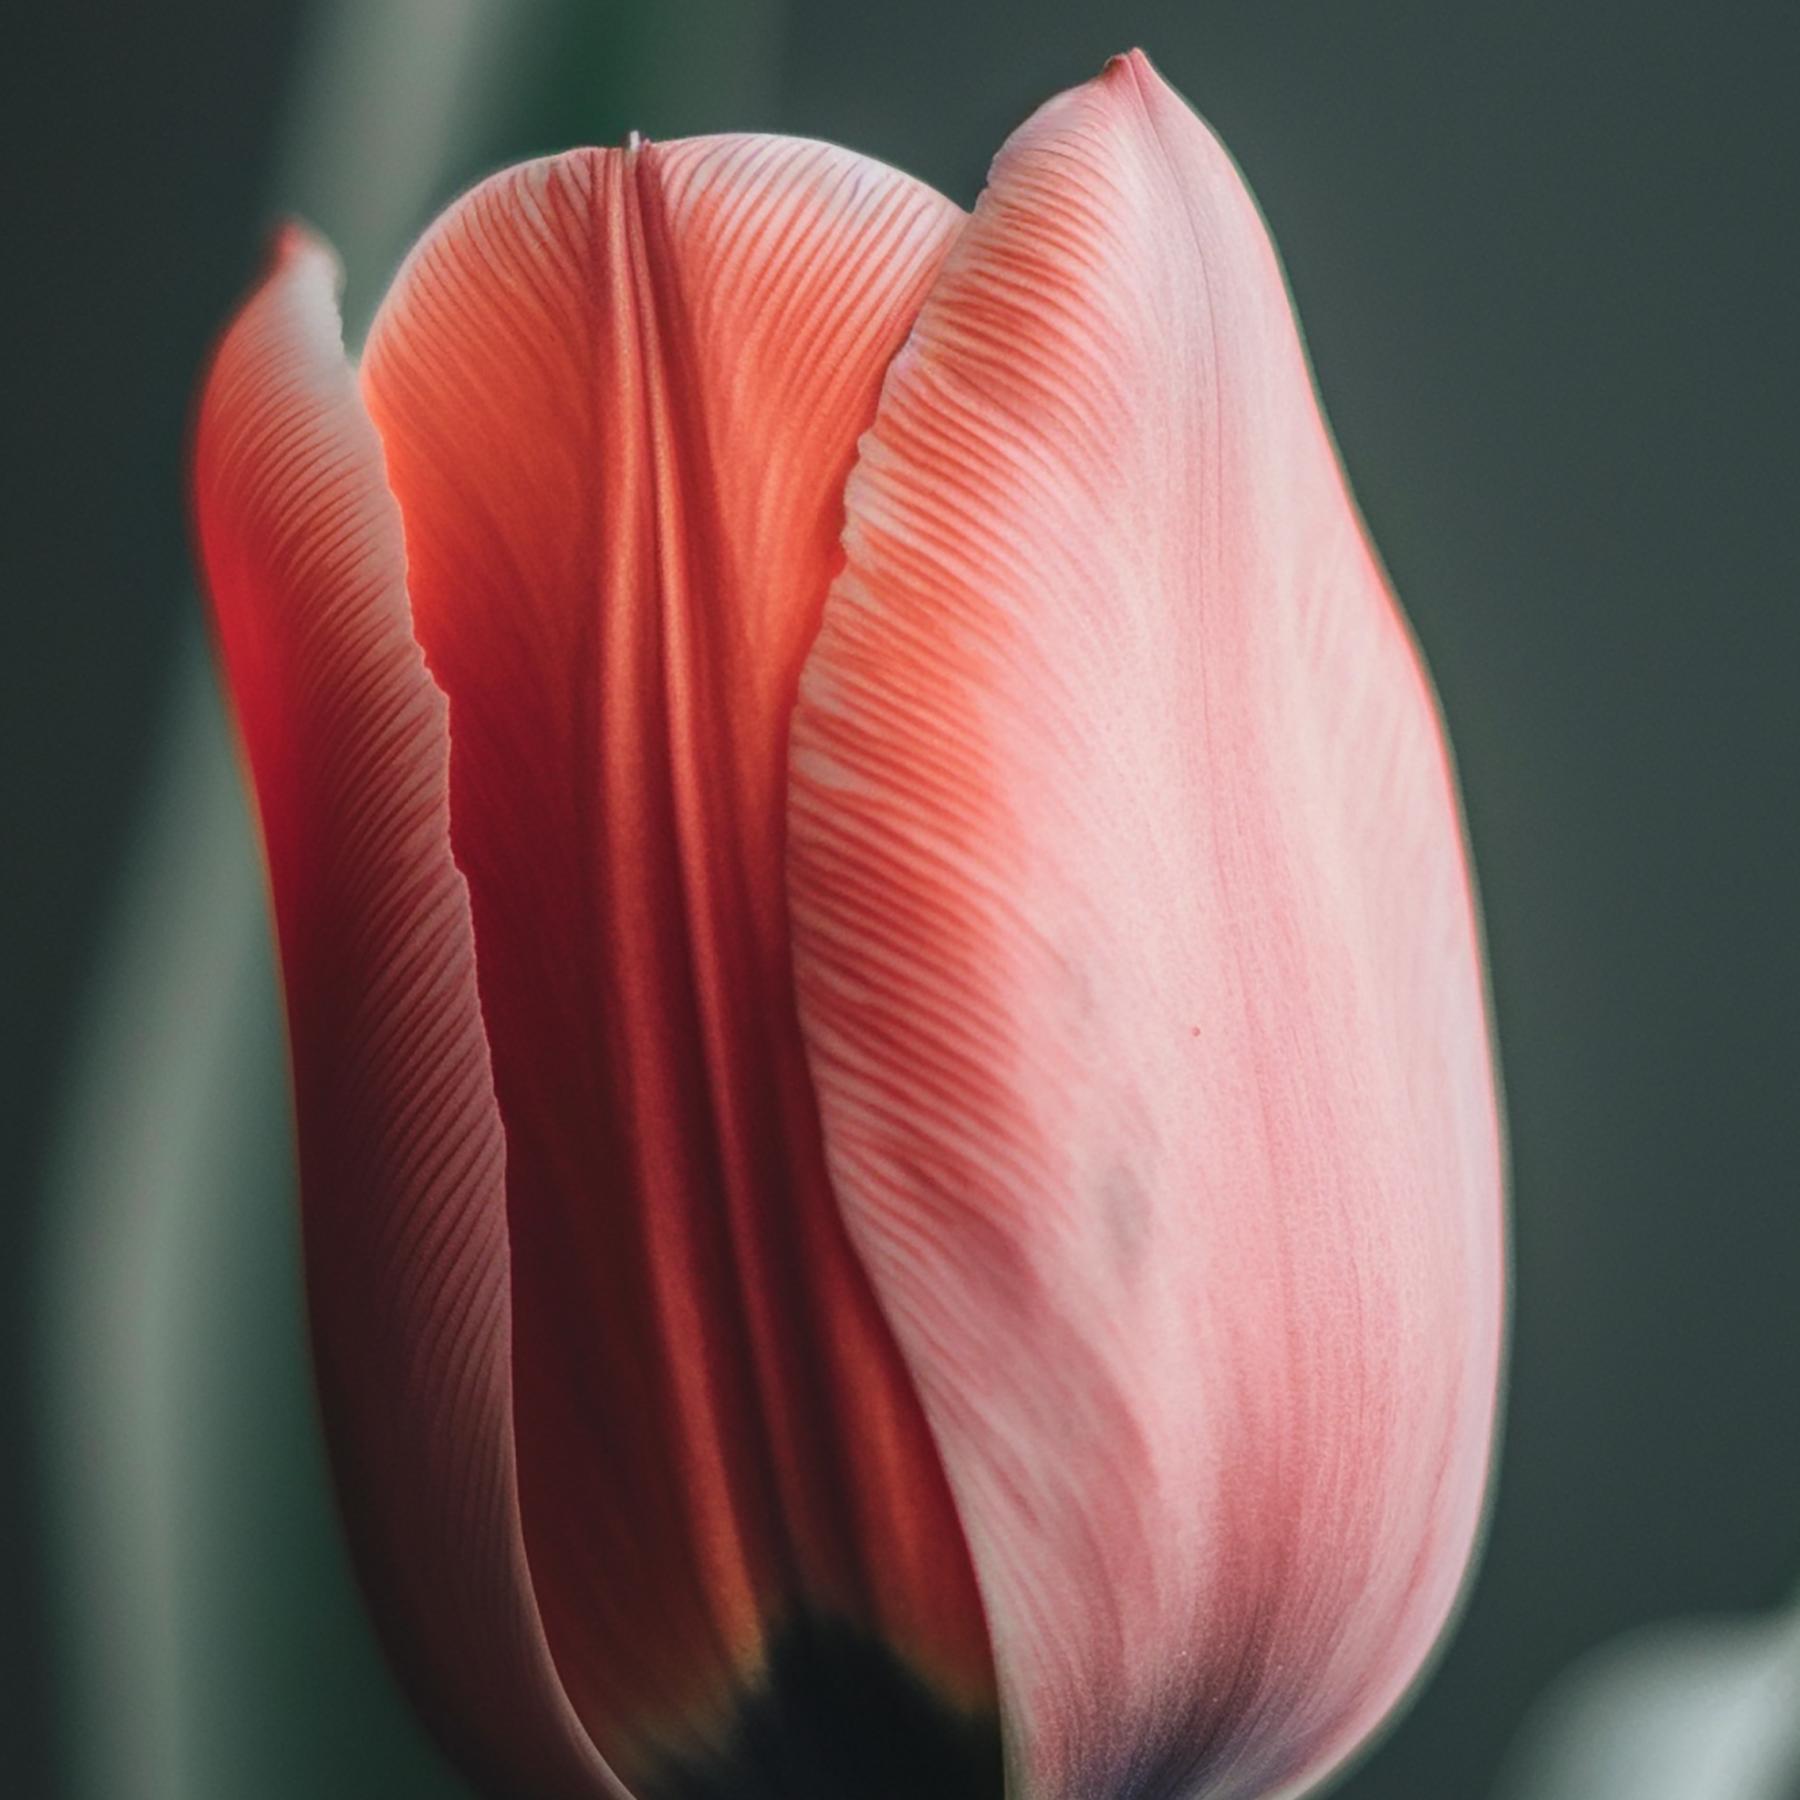 PINK TULIP II (After Georgia O'Keeffe) photograph on plexiglass  - American Modern Photograph by Max Grant